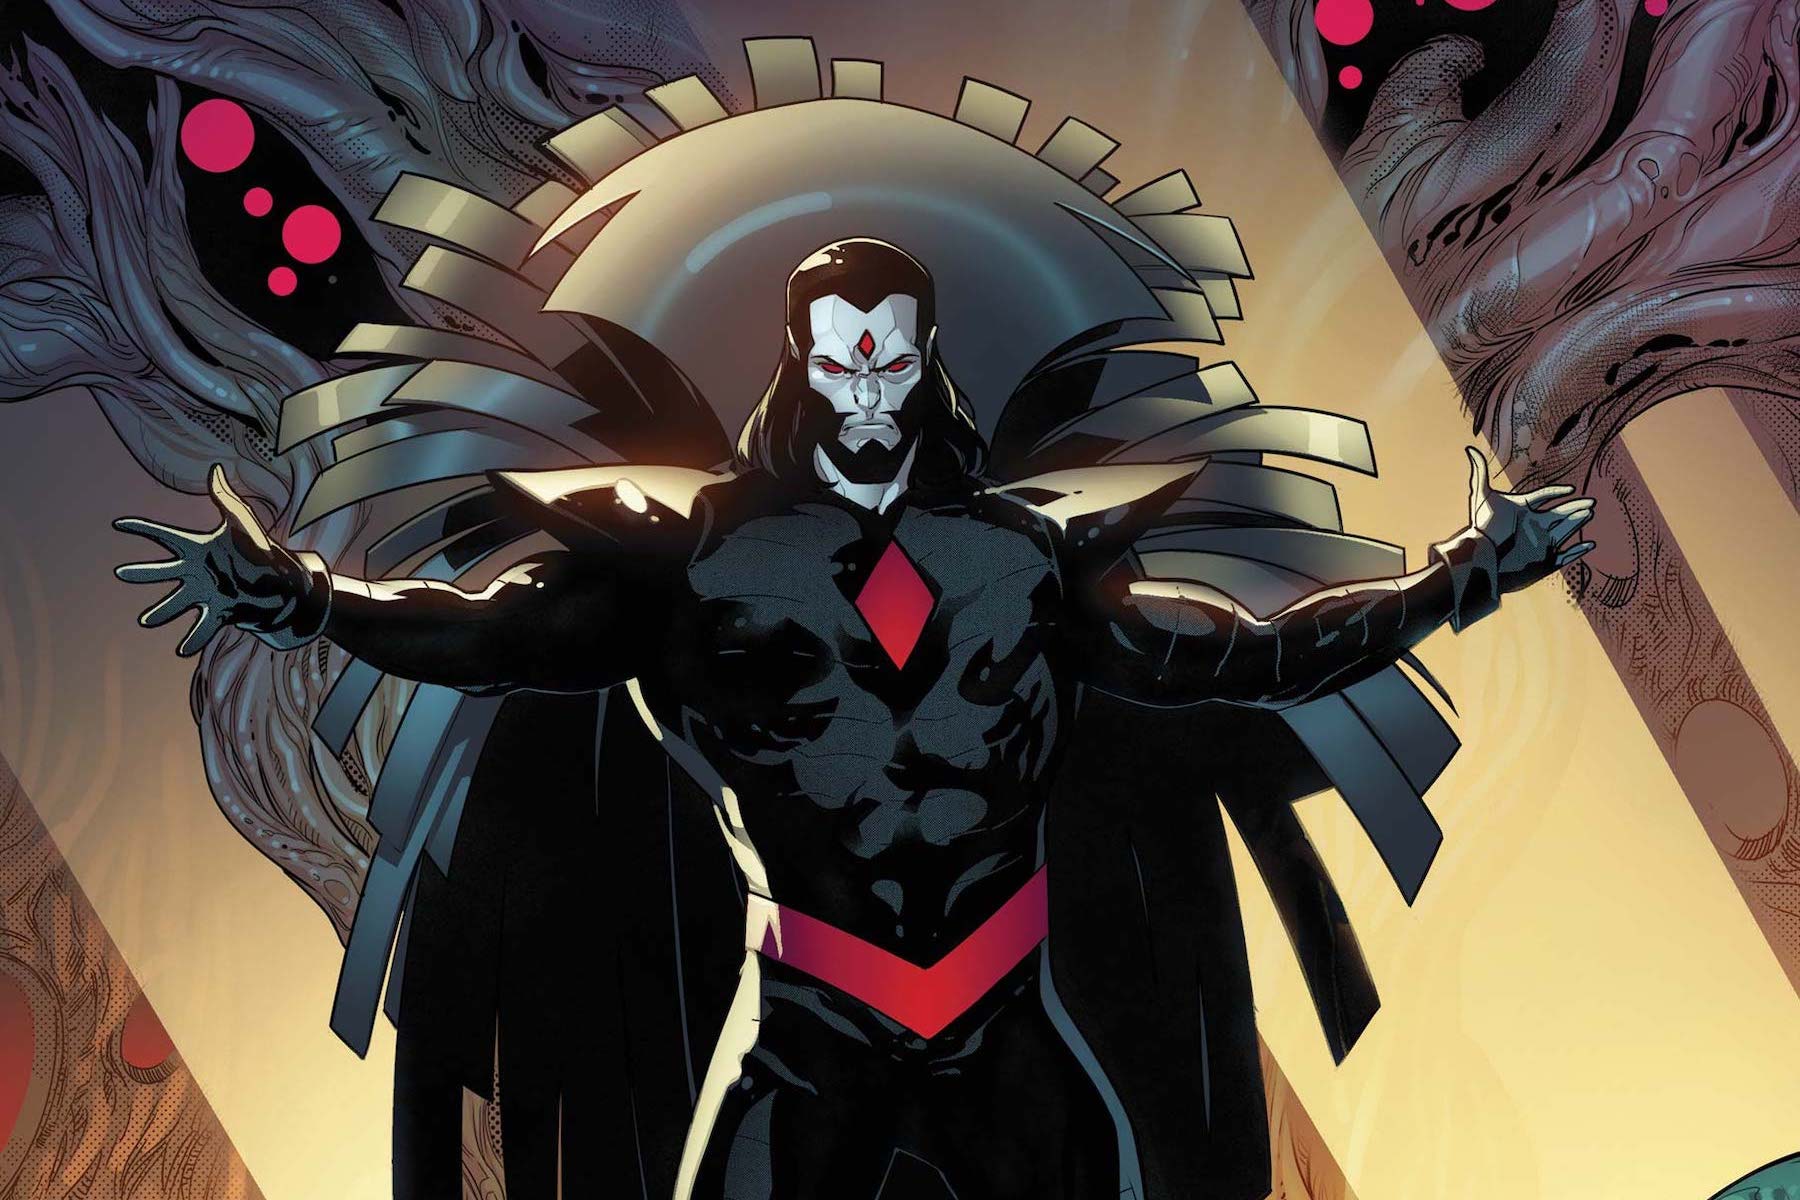 Mister Sinister, in all his caped glory, stands with arms spread, on the cover of Powers of X #5, Marvel Comics (2019).